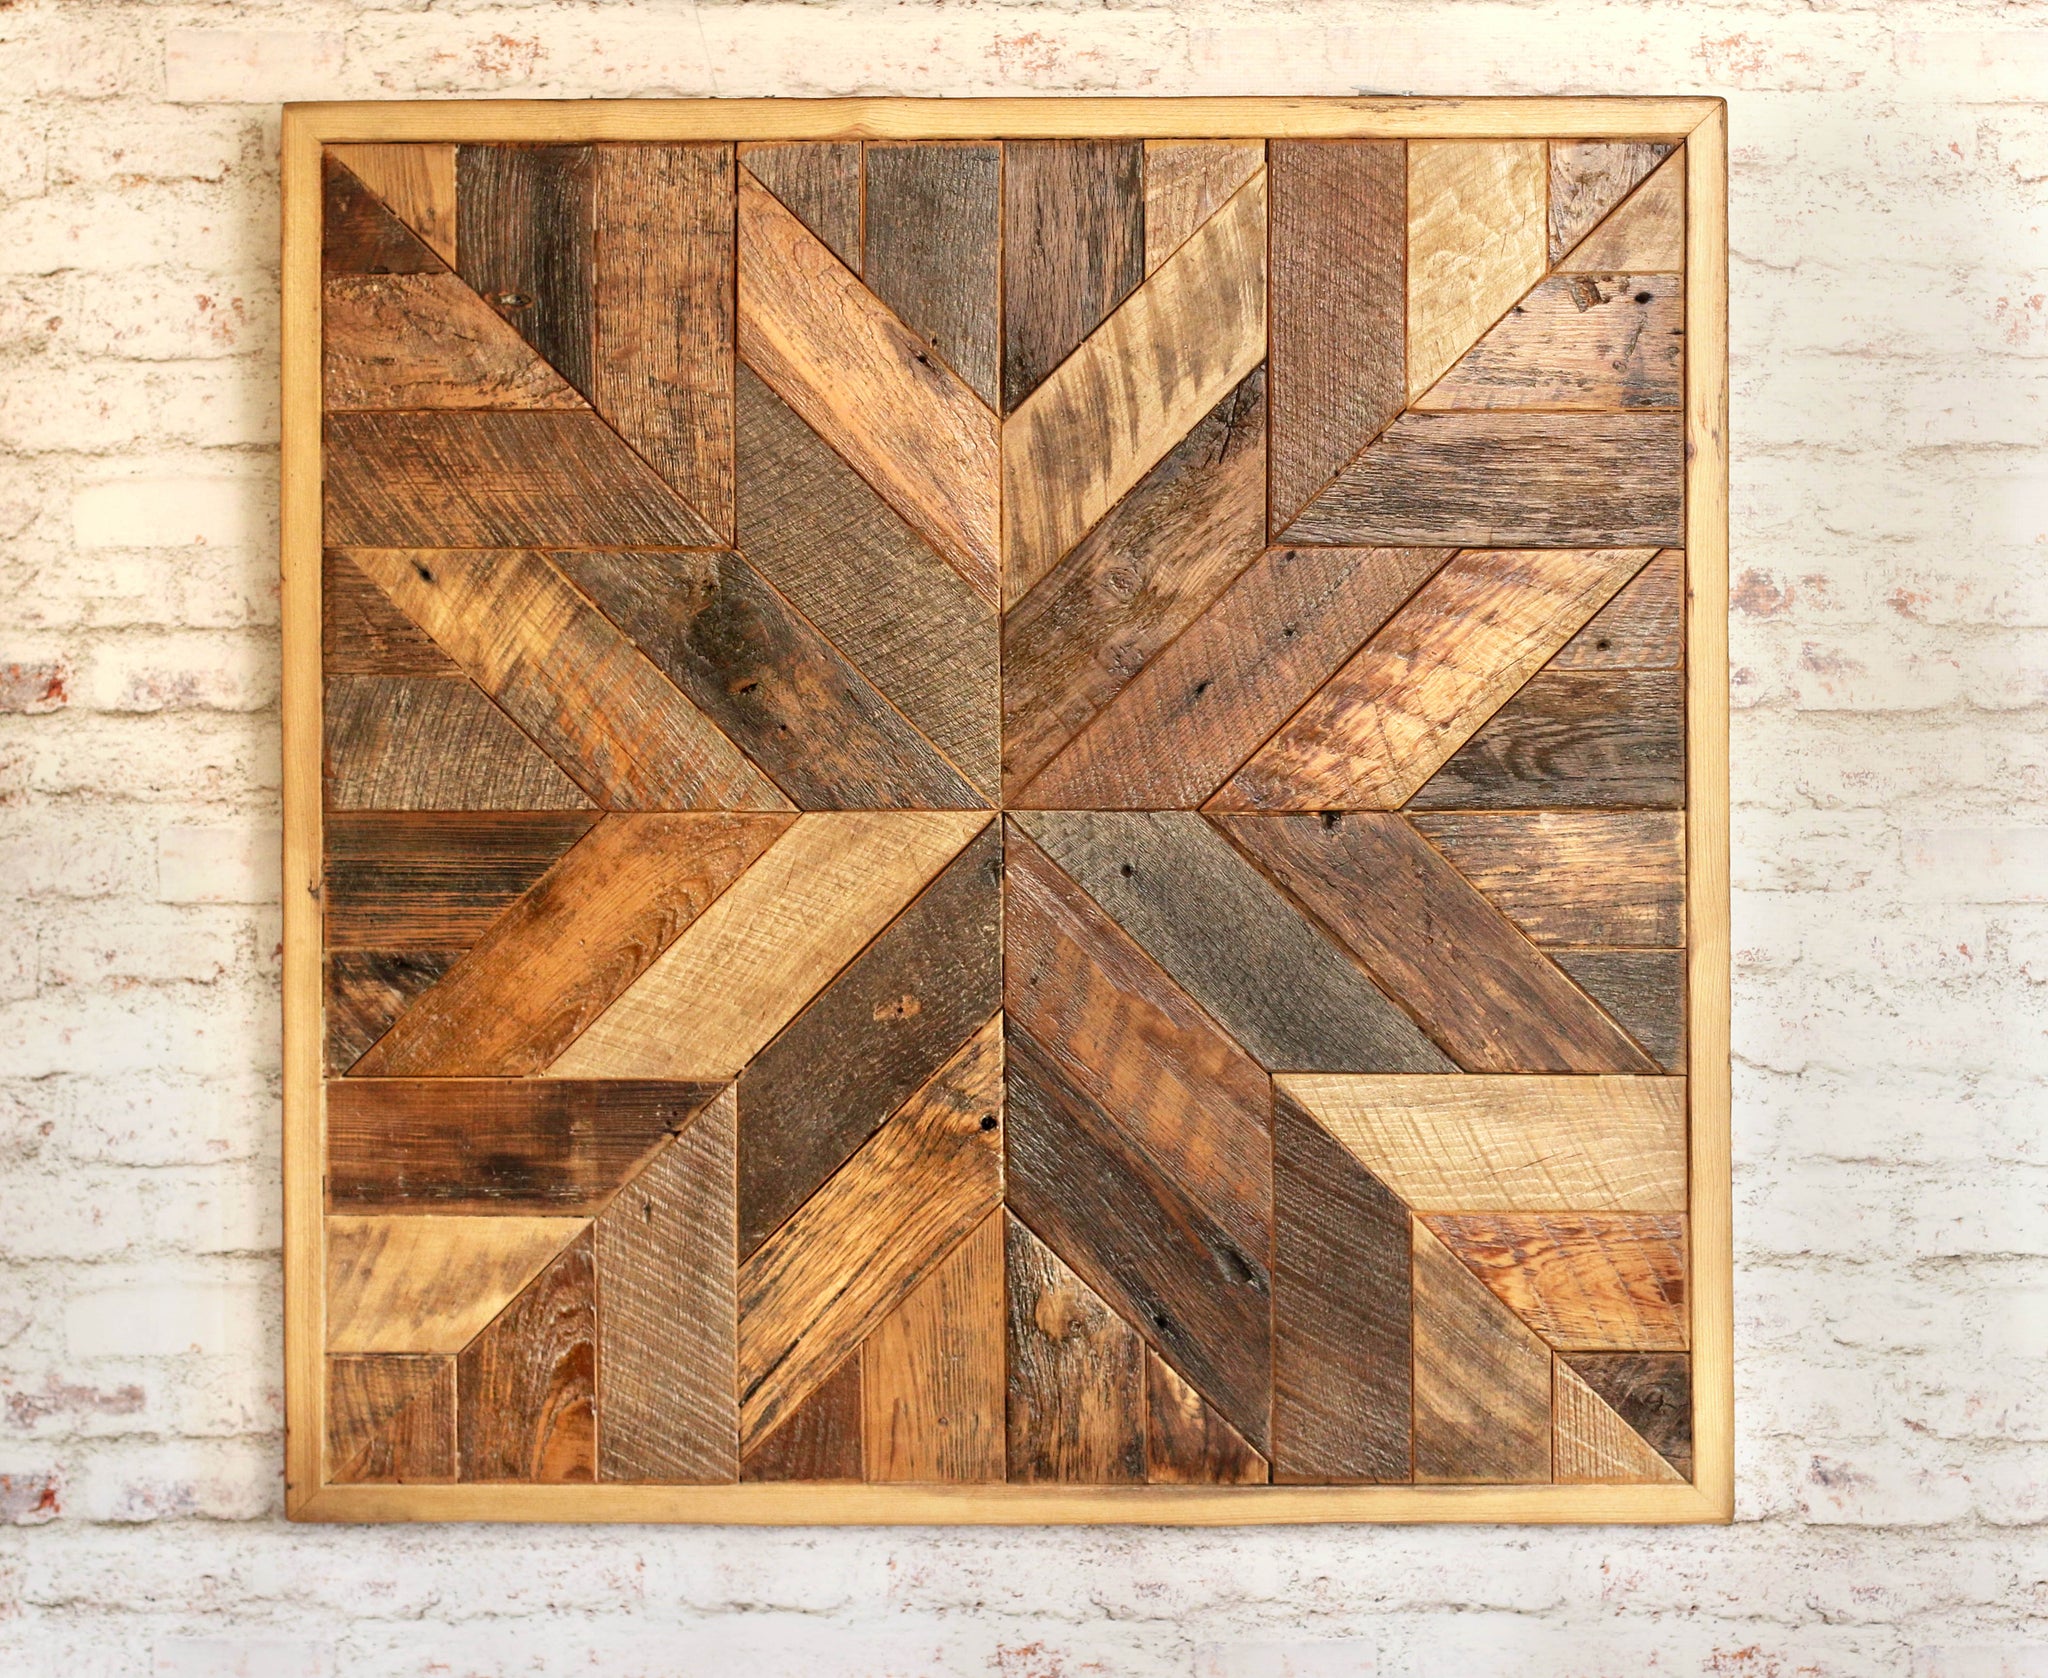 Reclaimed Wood Quilt Wall Art Grindstone Design